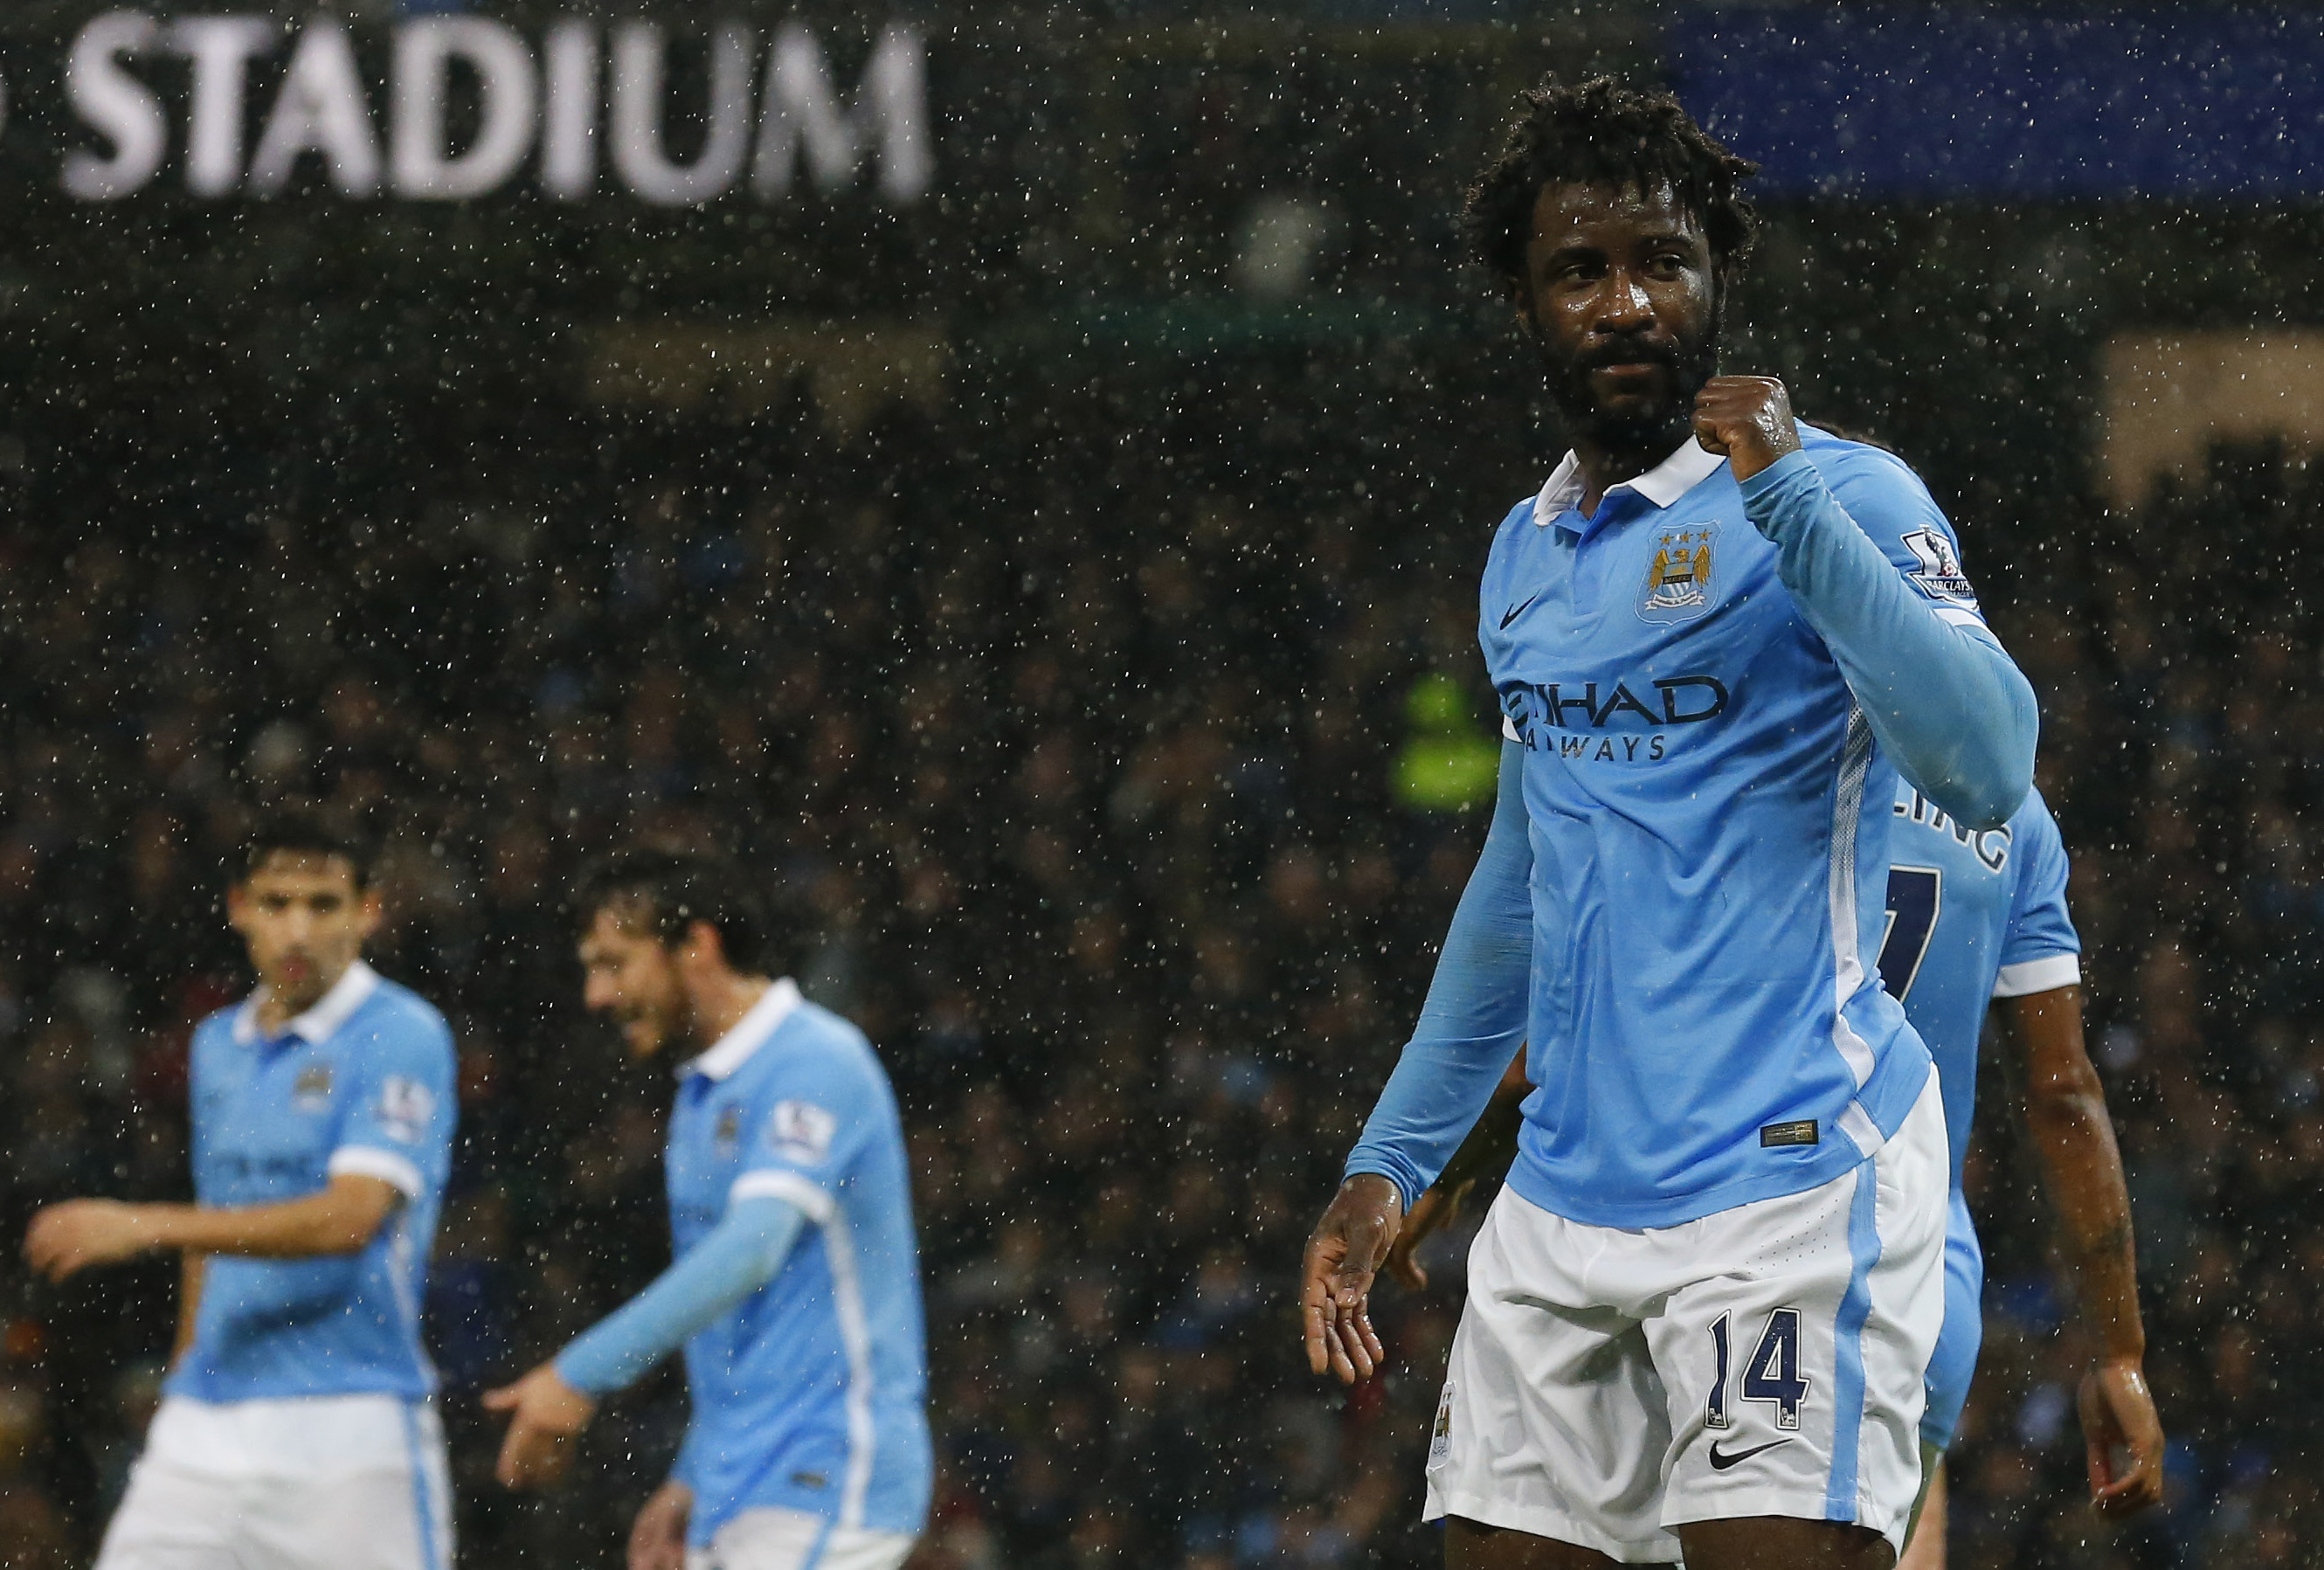 Manchester City's Ivorian striker Wilfried Bony celebrates scoring the opening goal during the English Premier League football match between Manchester City and Swansea City at the Etihad Stadium in Manchester, north west England, on December 12, 2015. AFP PHOTO / LINDSEY PARNABY

RESTRICTED TO EDITORIAL USE. No use with unauthorized audio, video, data, fixture lists, club/league logos or 'live' services. Online in-match use limited to 75 images, no video emulation. No use in betting, games or single club/league/player publications. / AFP / LINDSEY PARNABY        (Photo credit should read LINDSEY PARNABY/AFP/Getty Images)